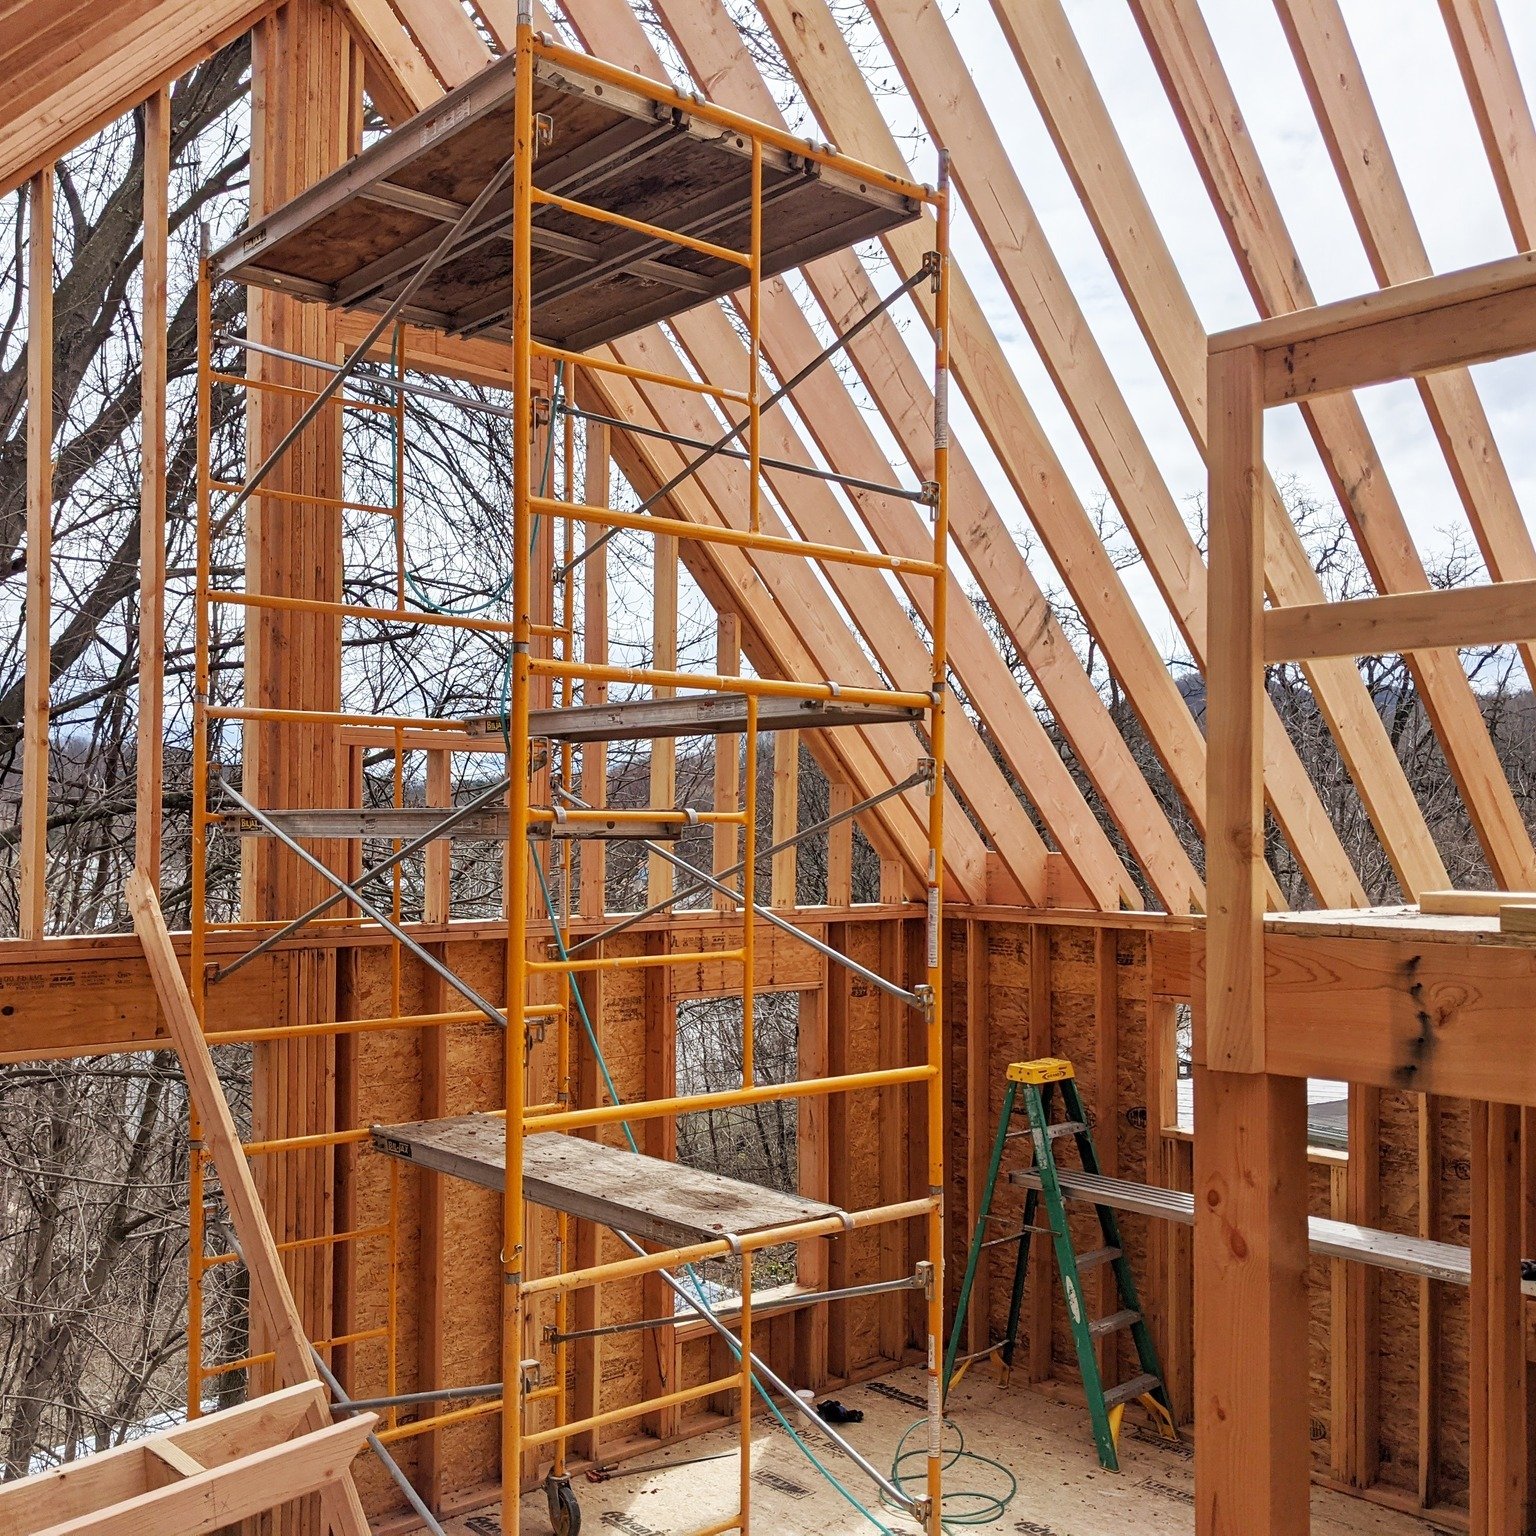 Let&rsquo;s take a &ldquo;peak!&rdquo; Gable roof framing takes shape at our #RondoutCarriageHouse construction site.

Please vote for us DAILY until May 15th in the FINAL ROUND of @chronogram's 5th annual Chronogrammies Reader's Choice Awards for Be